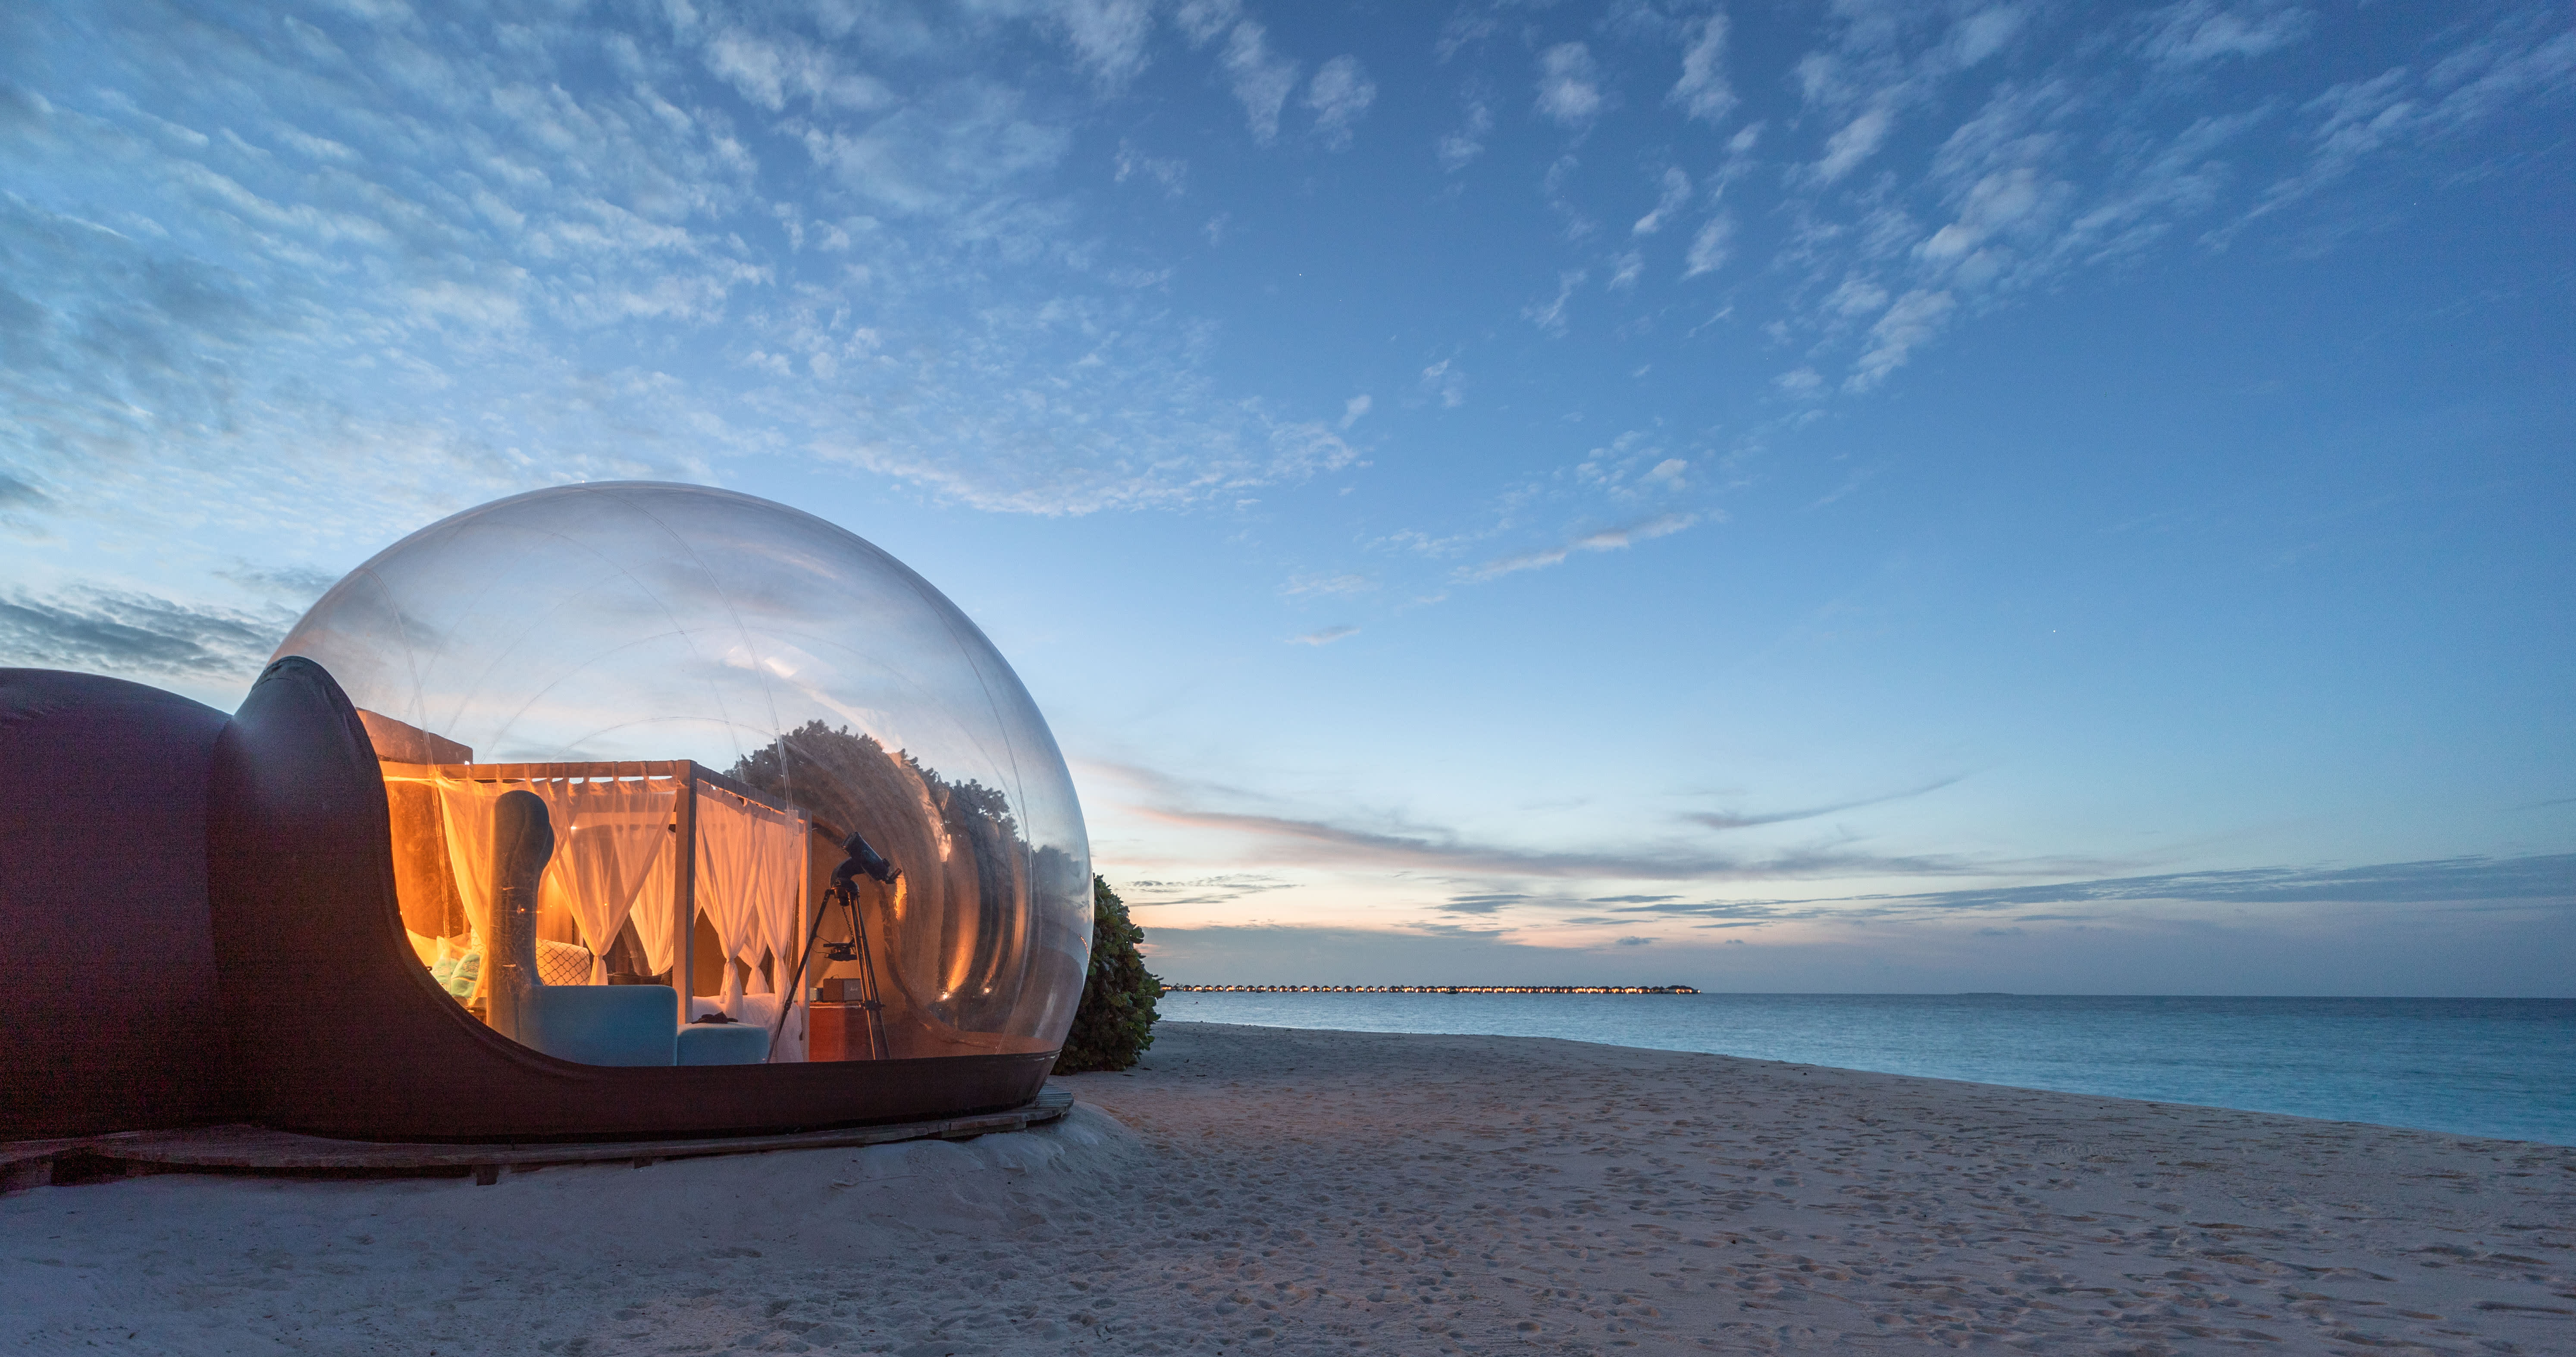 Tree pods and beach bedrooms:  Social distancing in the Maldives